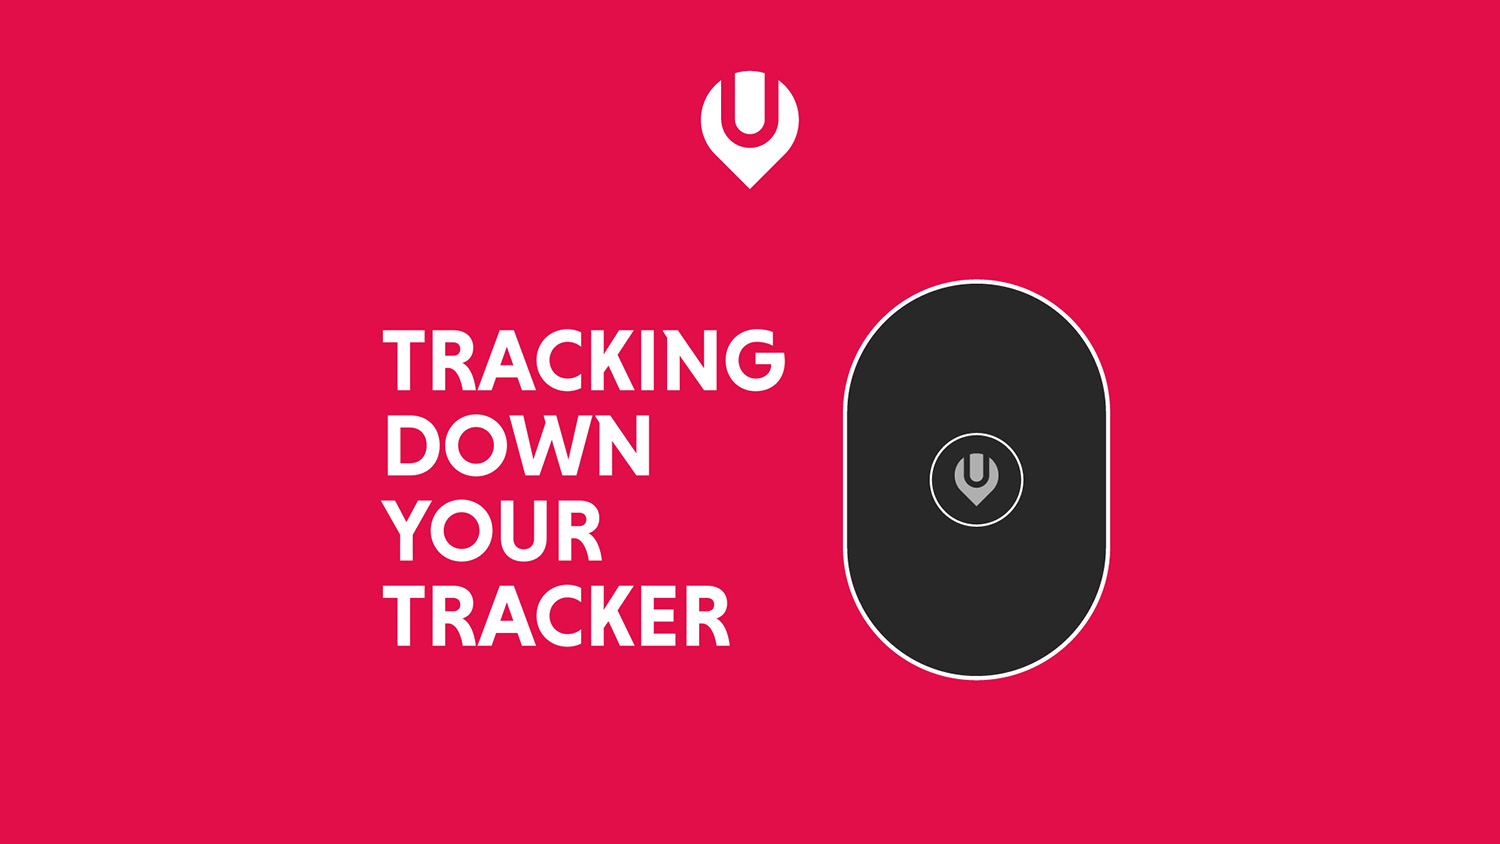 Tracking down your tracker